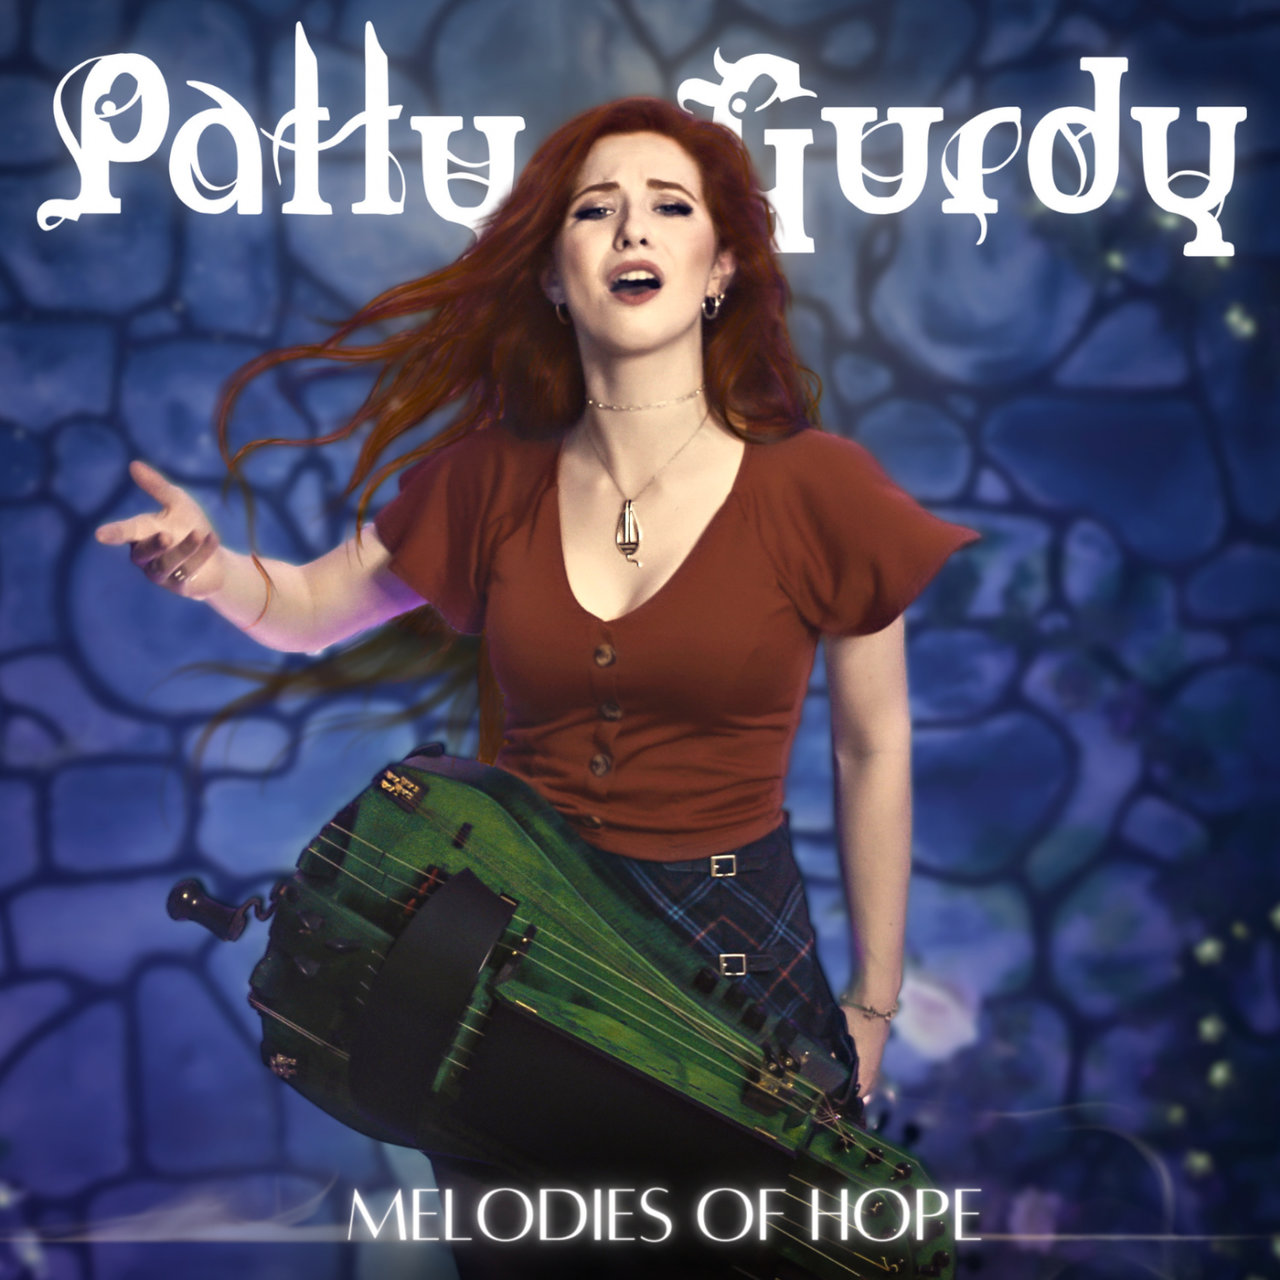 Patty Gurdy Melodies Of Hope cover artwork